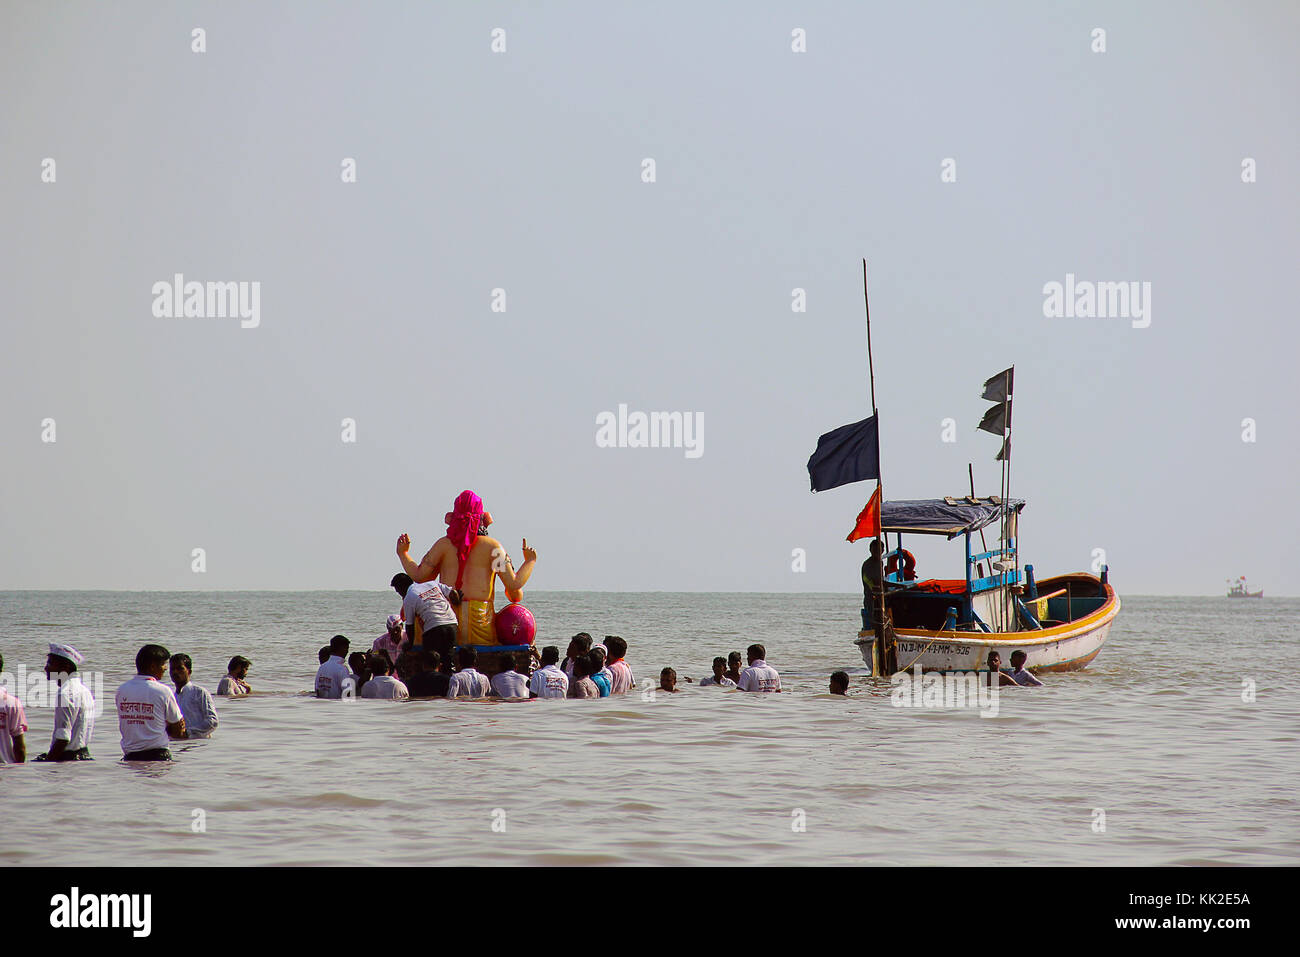 Huge Ganapati idol taken for immersion to the sea in wooden boats, Chowpatty, Mumbai Stock Photo